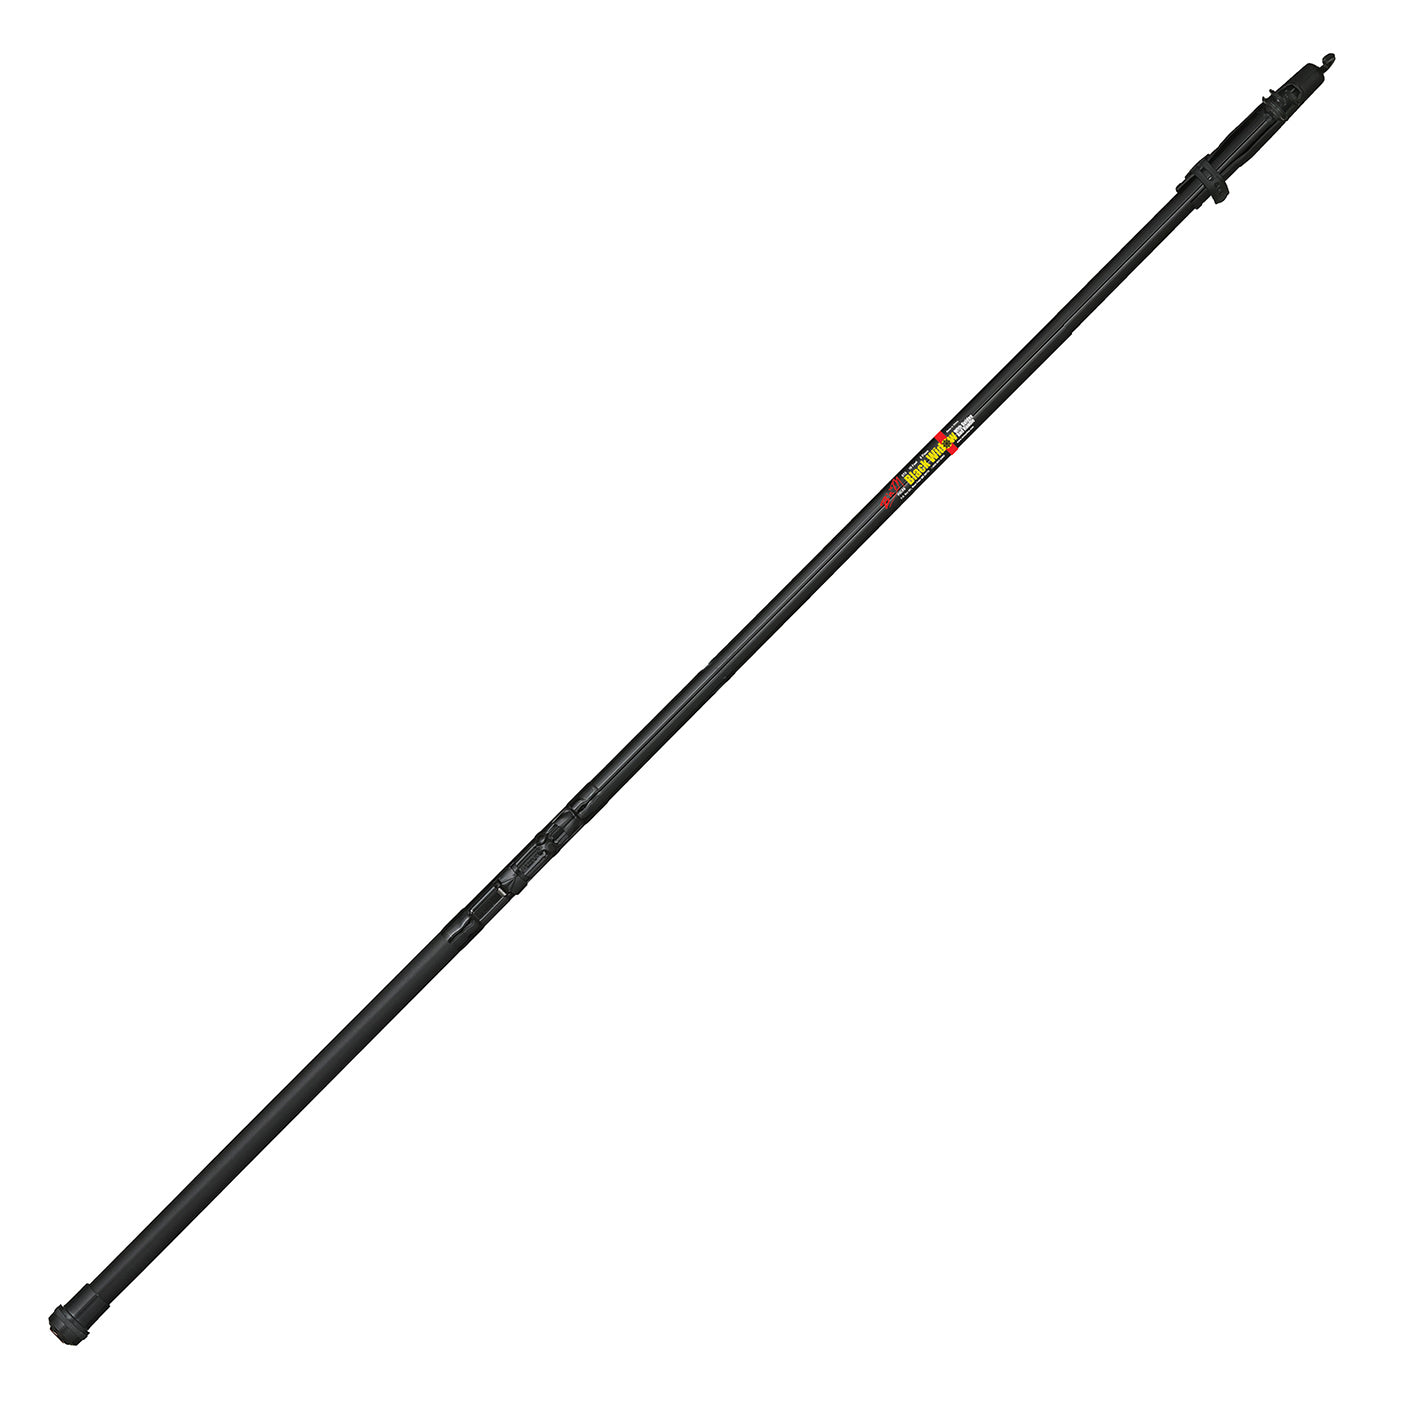 BnM WEST POINT CRAPPIE FISHING POLE,ROD 10' WPCR10n (SET OF 3) B&M